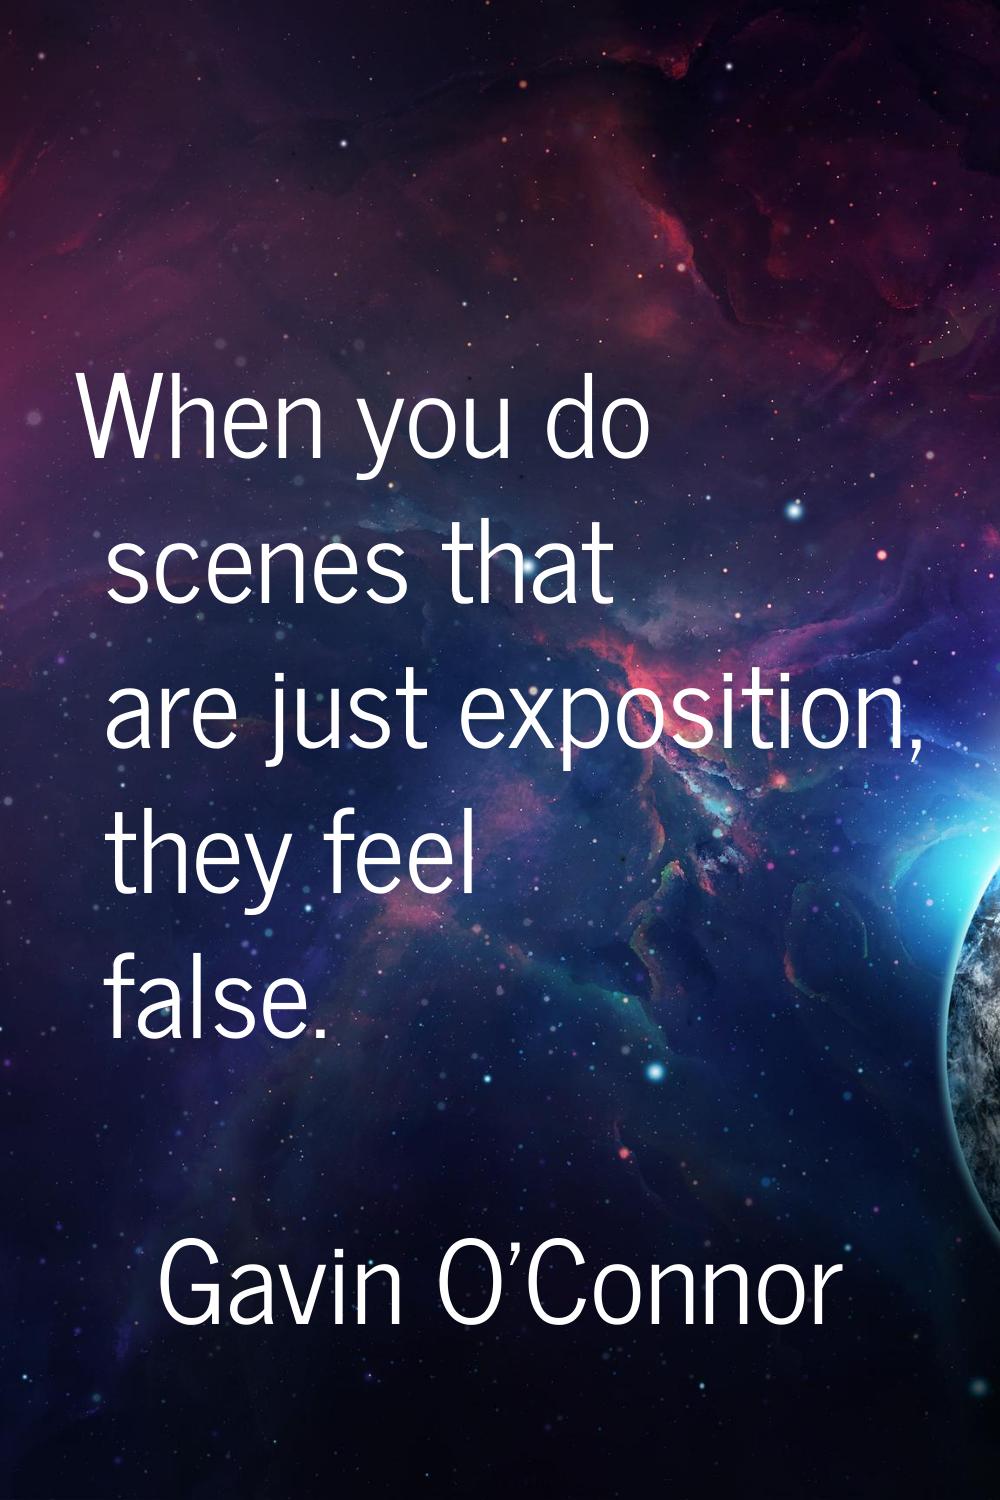 When you do scenes that are just exposition, they feel false.